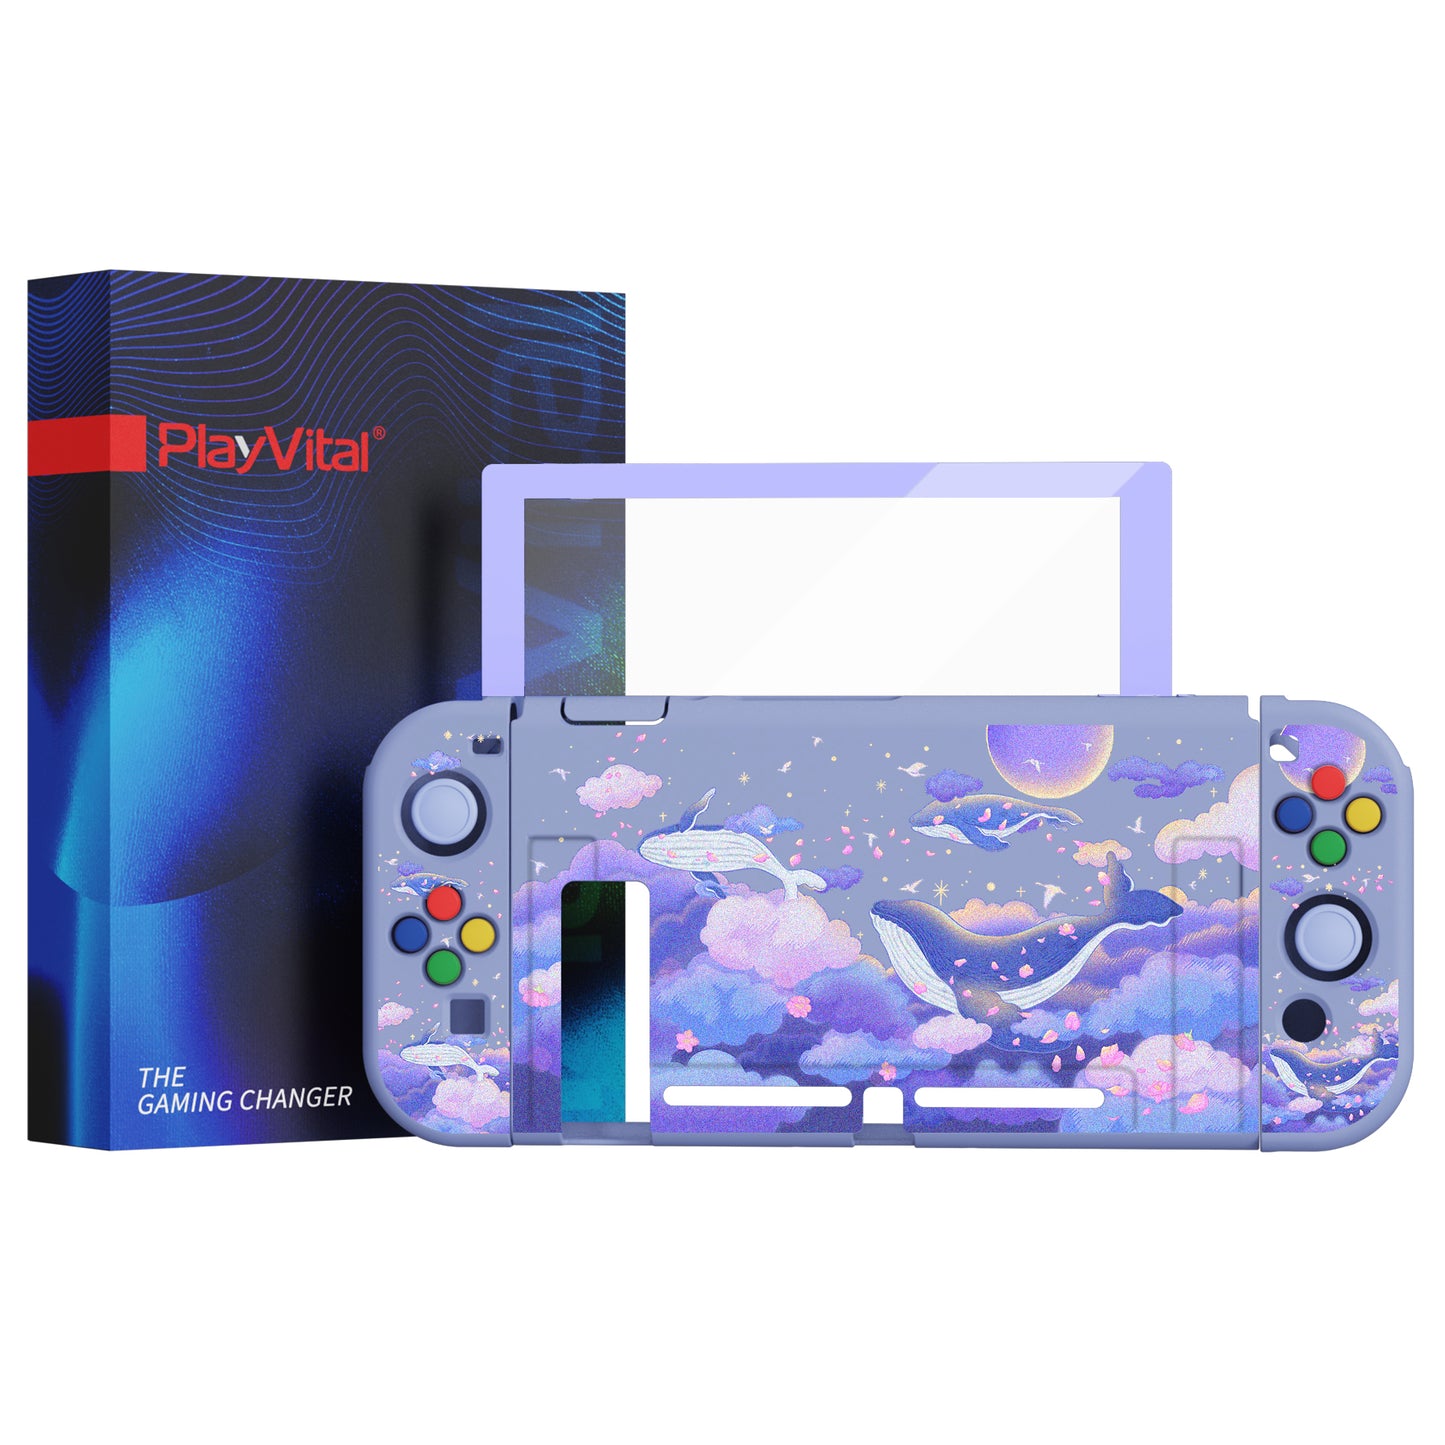 PlayVital ZealProtect Soft Protective Case for Nintendo Switch, Flexible Cover for Switch with Tempered Glass Screen Protector & Thumb Grips & ABXY Direction Button Caps - Whale in Dream - RNSYV6034 playvital